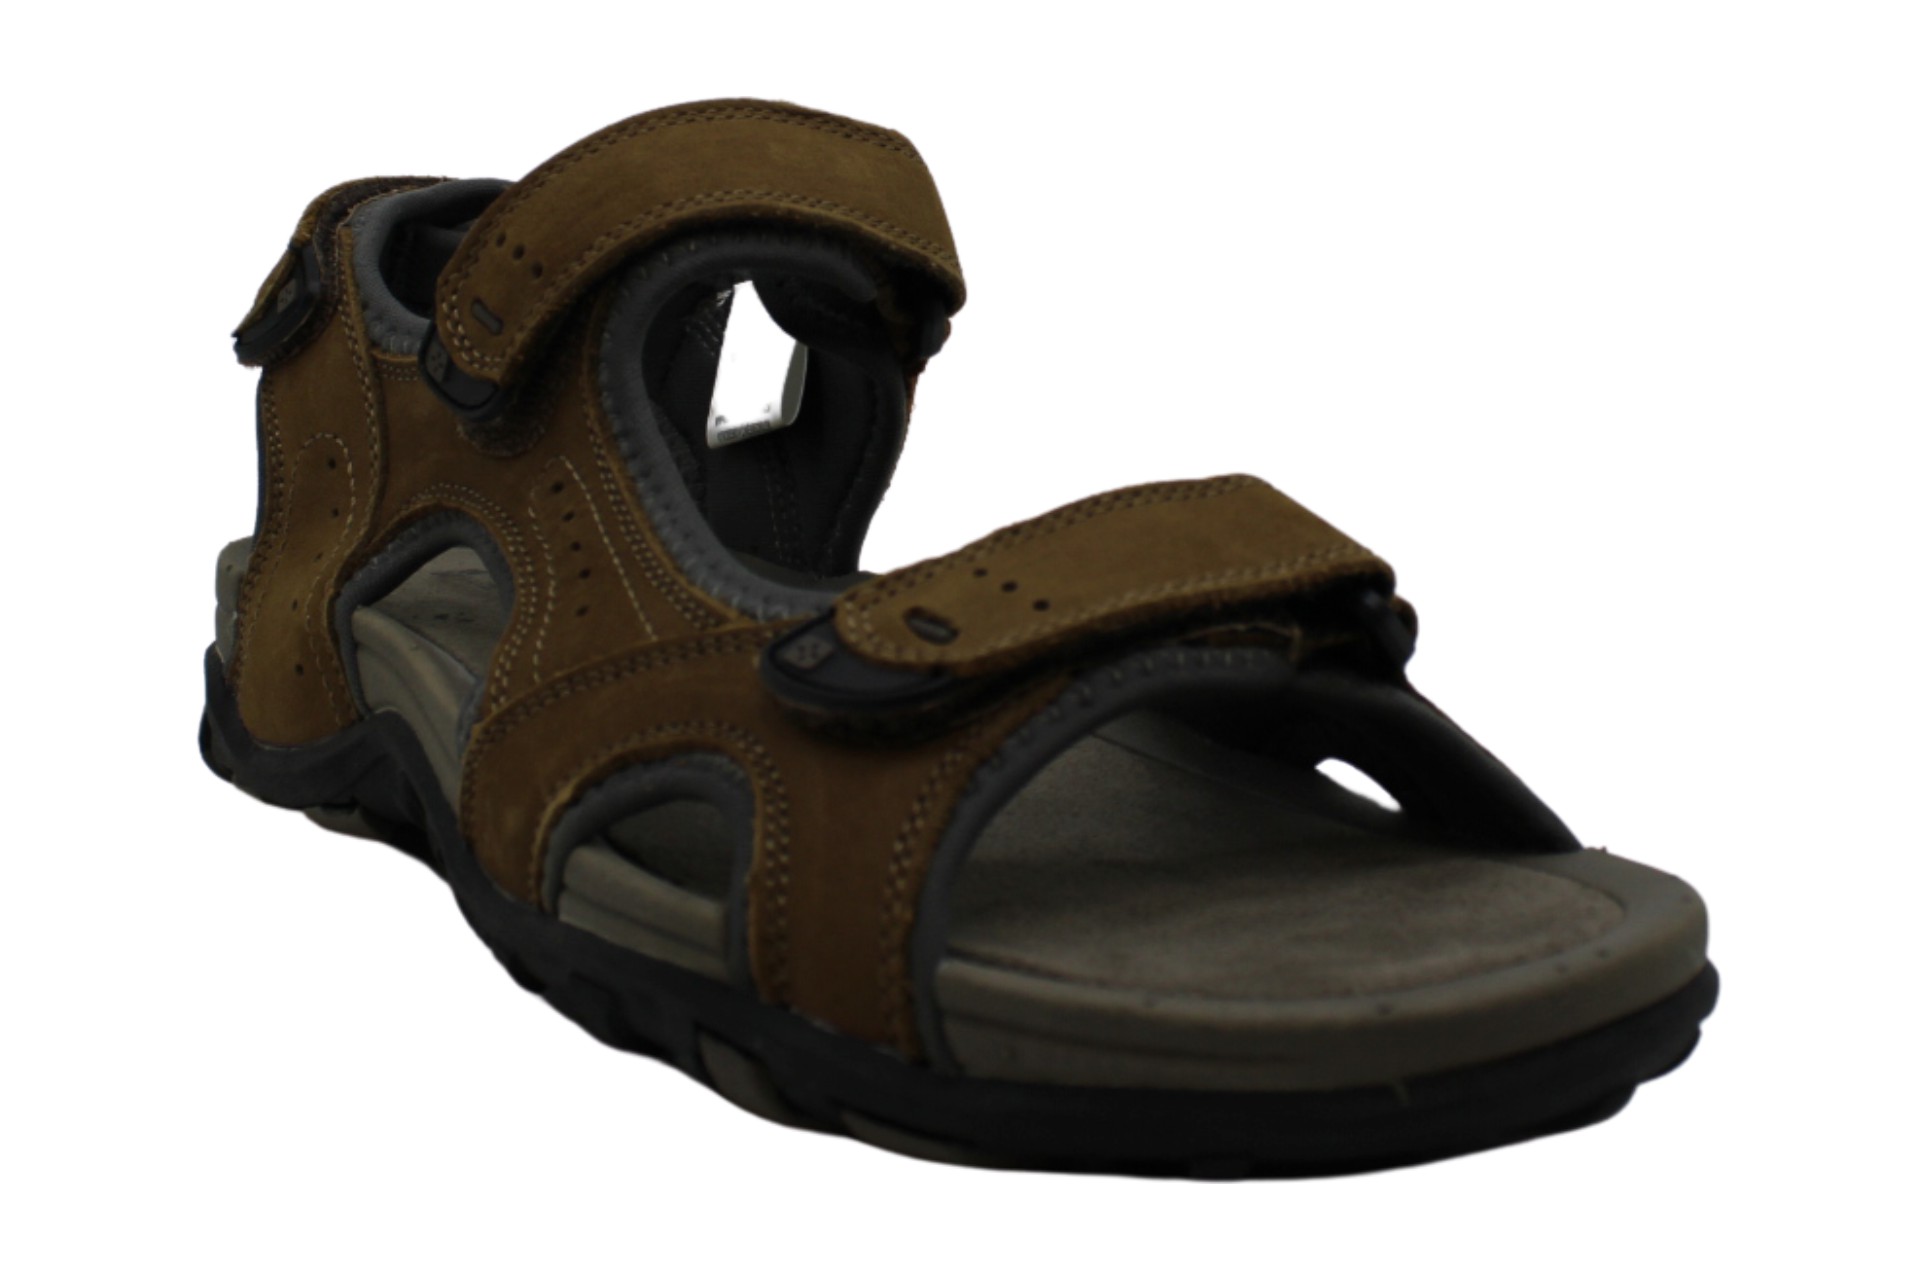 Mountain Warehouse Mens Sandals & Flip Flops in Brown Color, Size 10 ...